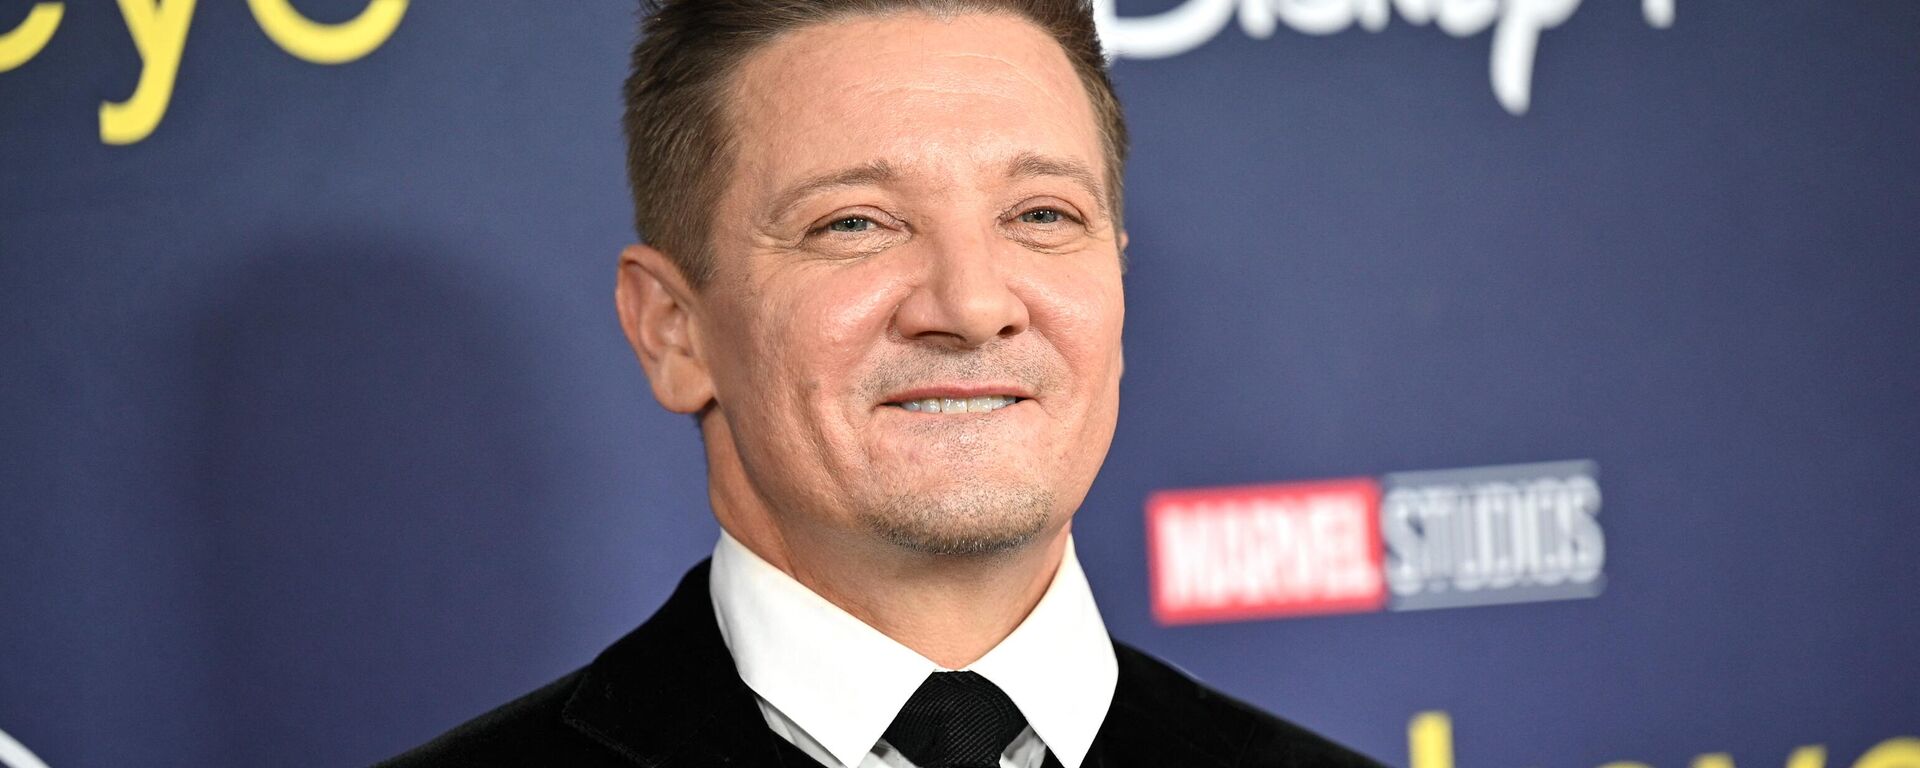 US actor Jeremy Renner arrives for the premiere of Marvel Studios' television miniseries Hawkeye at the El Capitan Theatre in Los Angeles, November 17, 2021 - Sputnik International, 1920, 22.01.2023